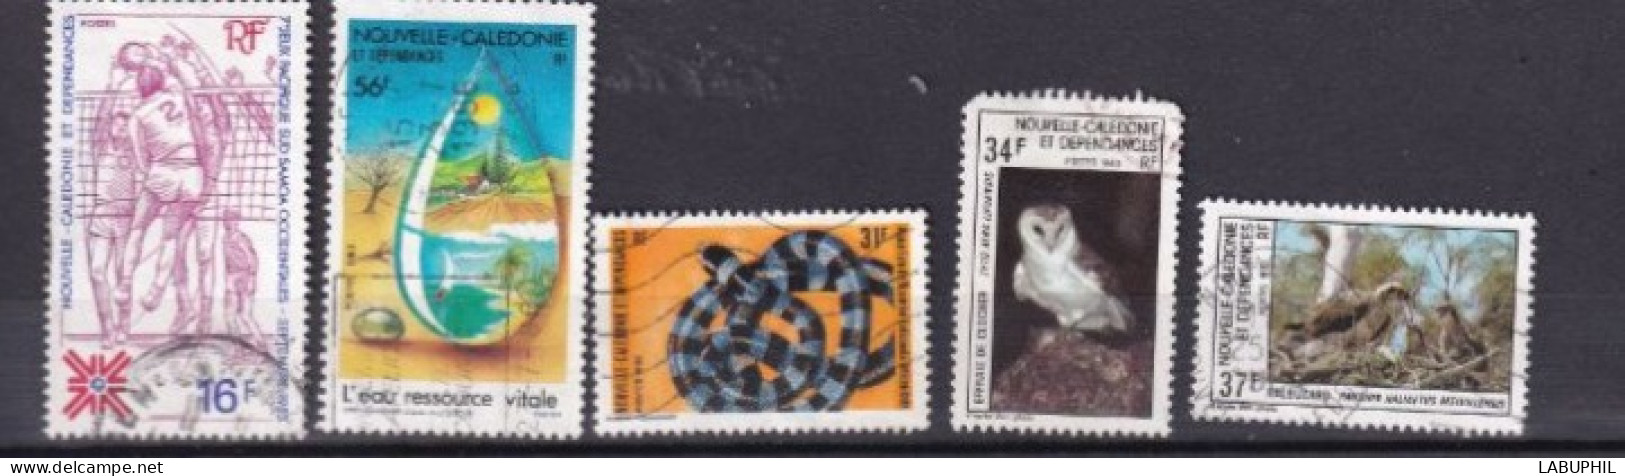 NOUVELLE CALEDONIE Dispersion D'une Collection Oblitéré Used  1983 - Used Stamps